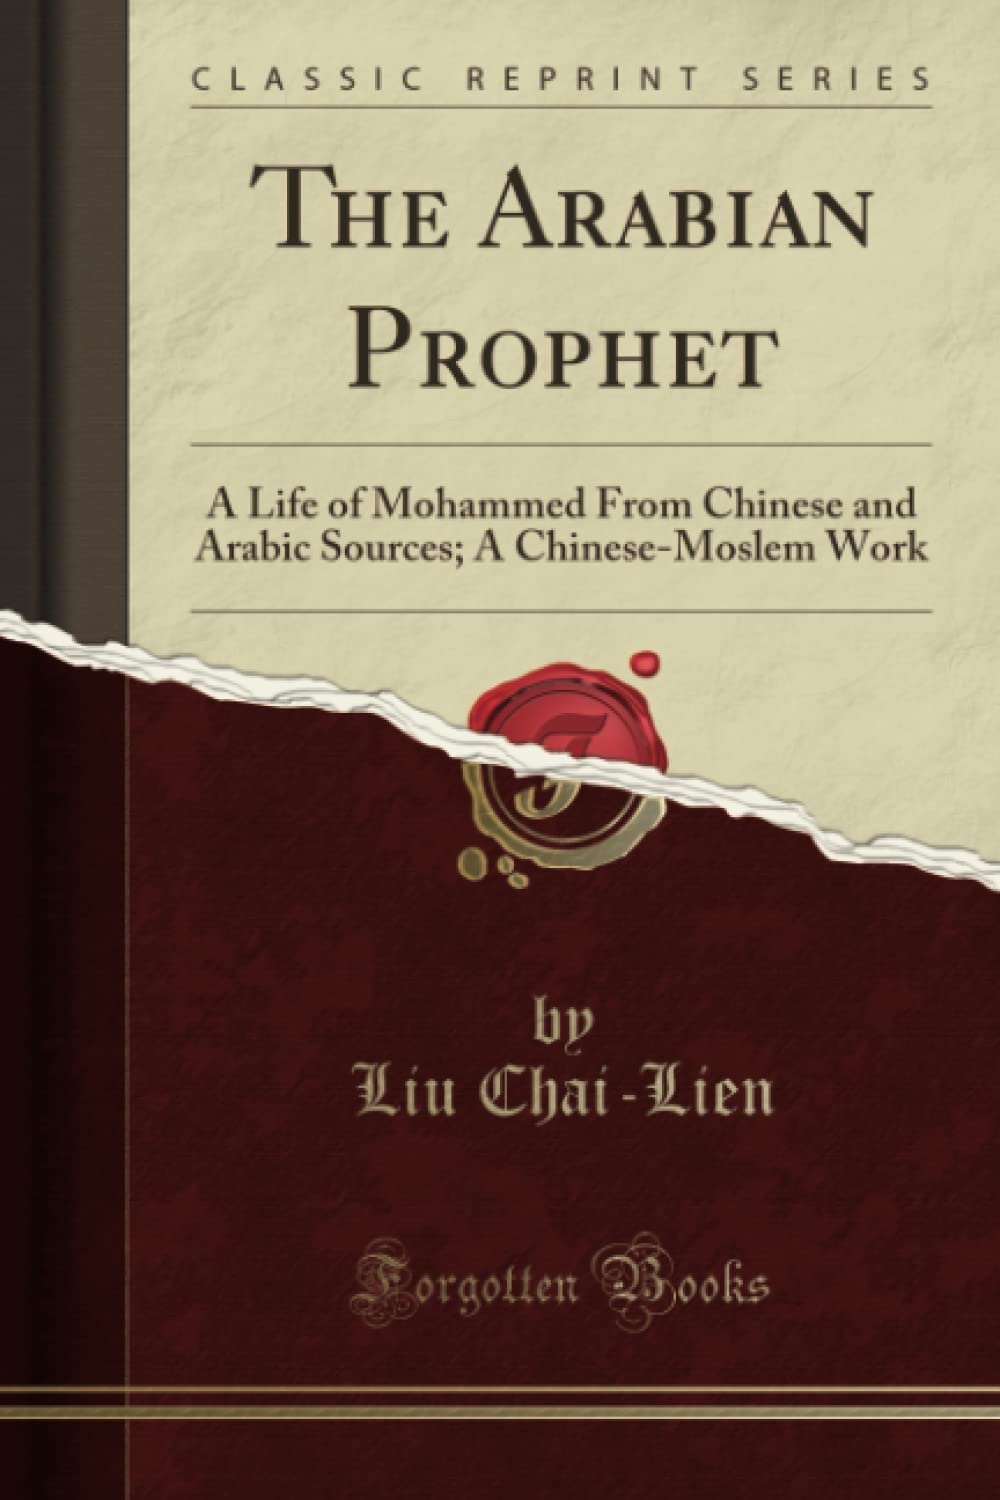 The Arabian Prophet: A Life of Mohammed from Chinese and Arabic Sources (Classic Reprint)